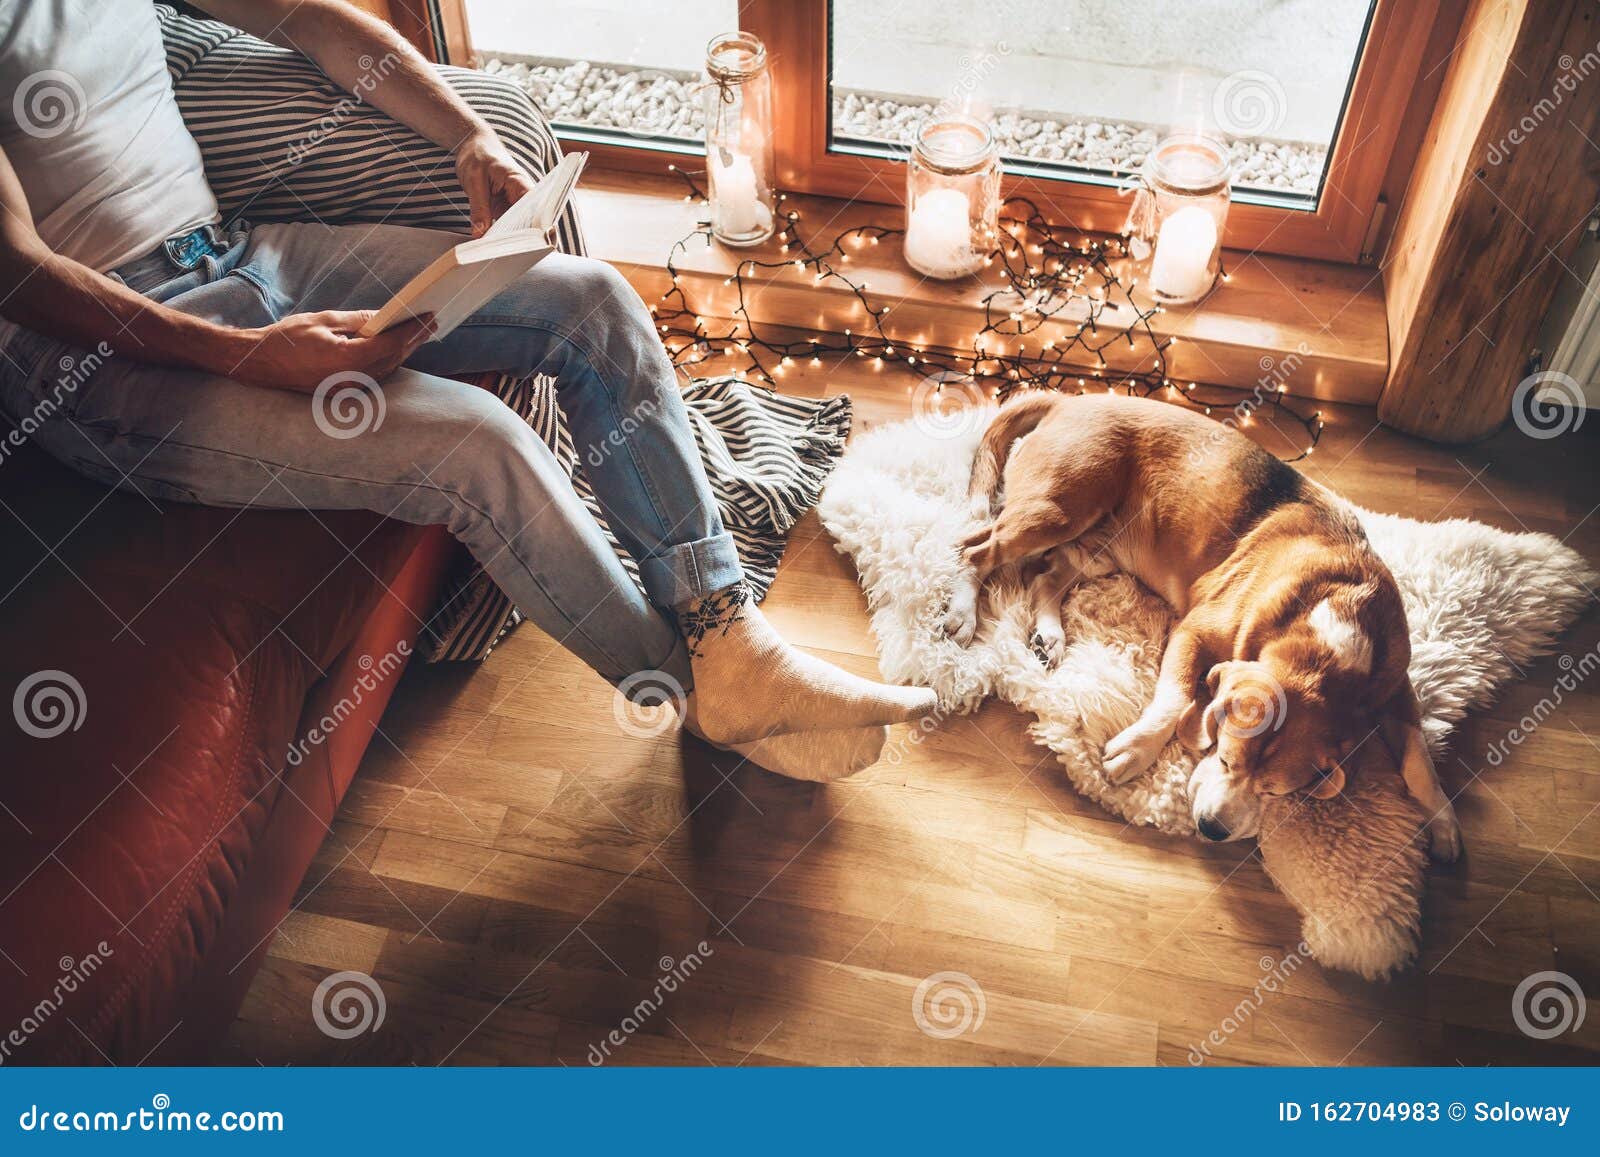 man reading book on the cozy couch near slipping his beagle dog on sheepskin in cozy home atmosphere. peaceful moments of cozy